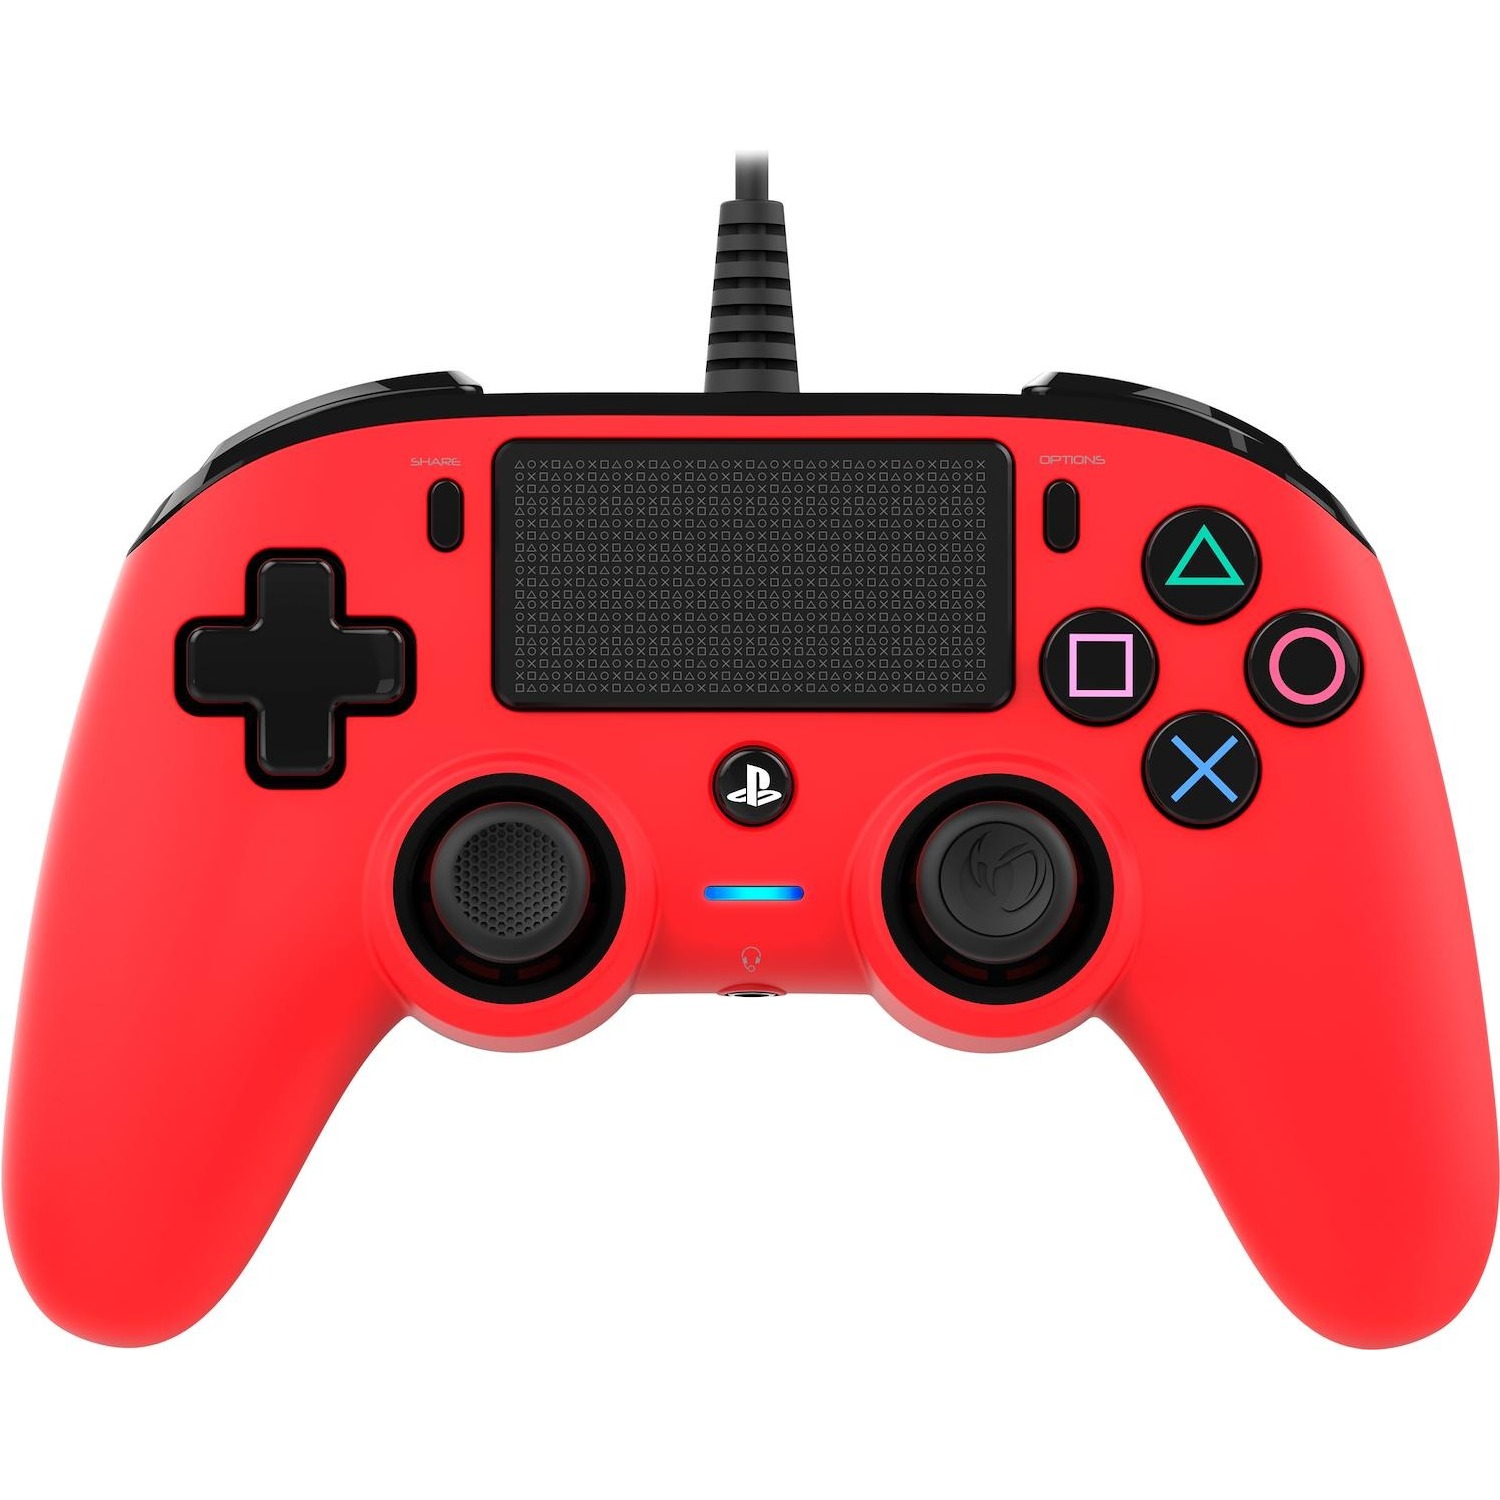 Nacon PS4 Pad compact red wired - DIMOStore